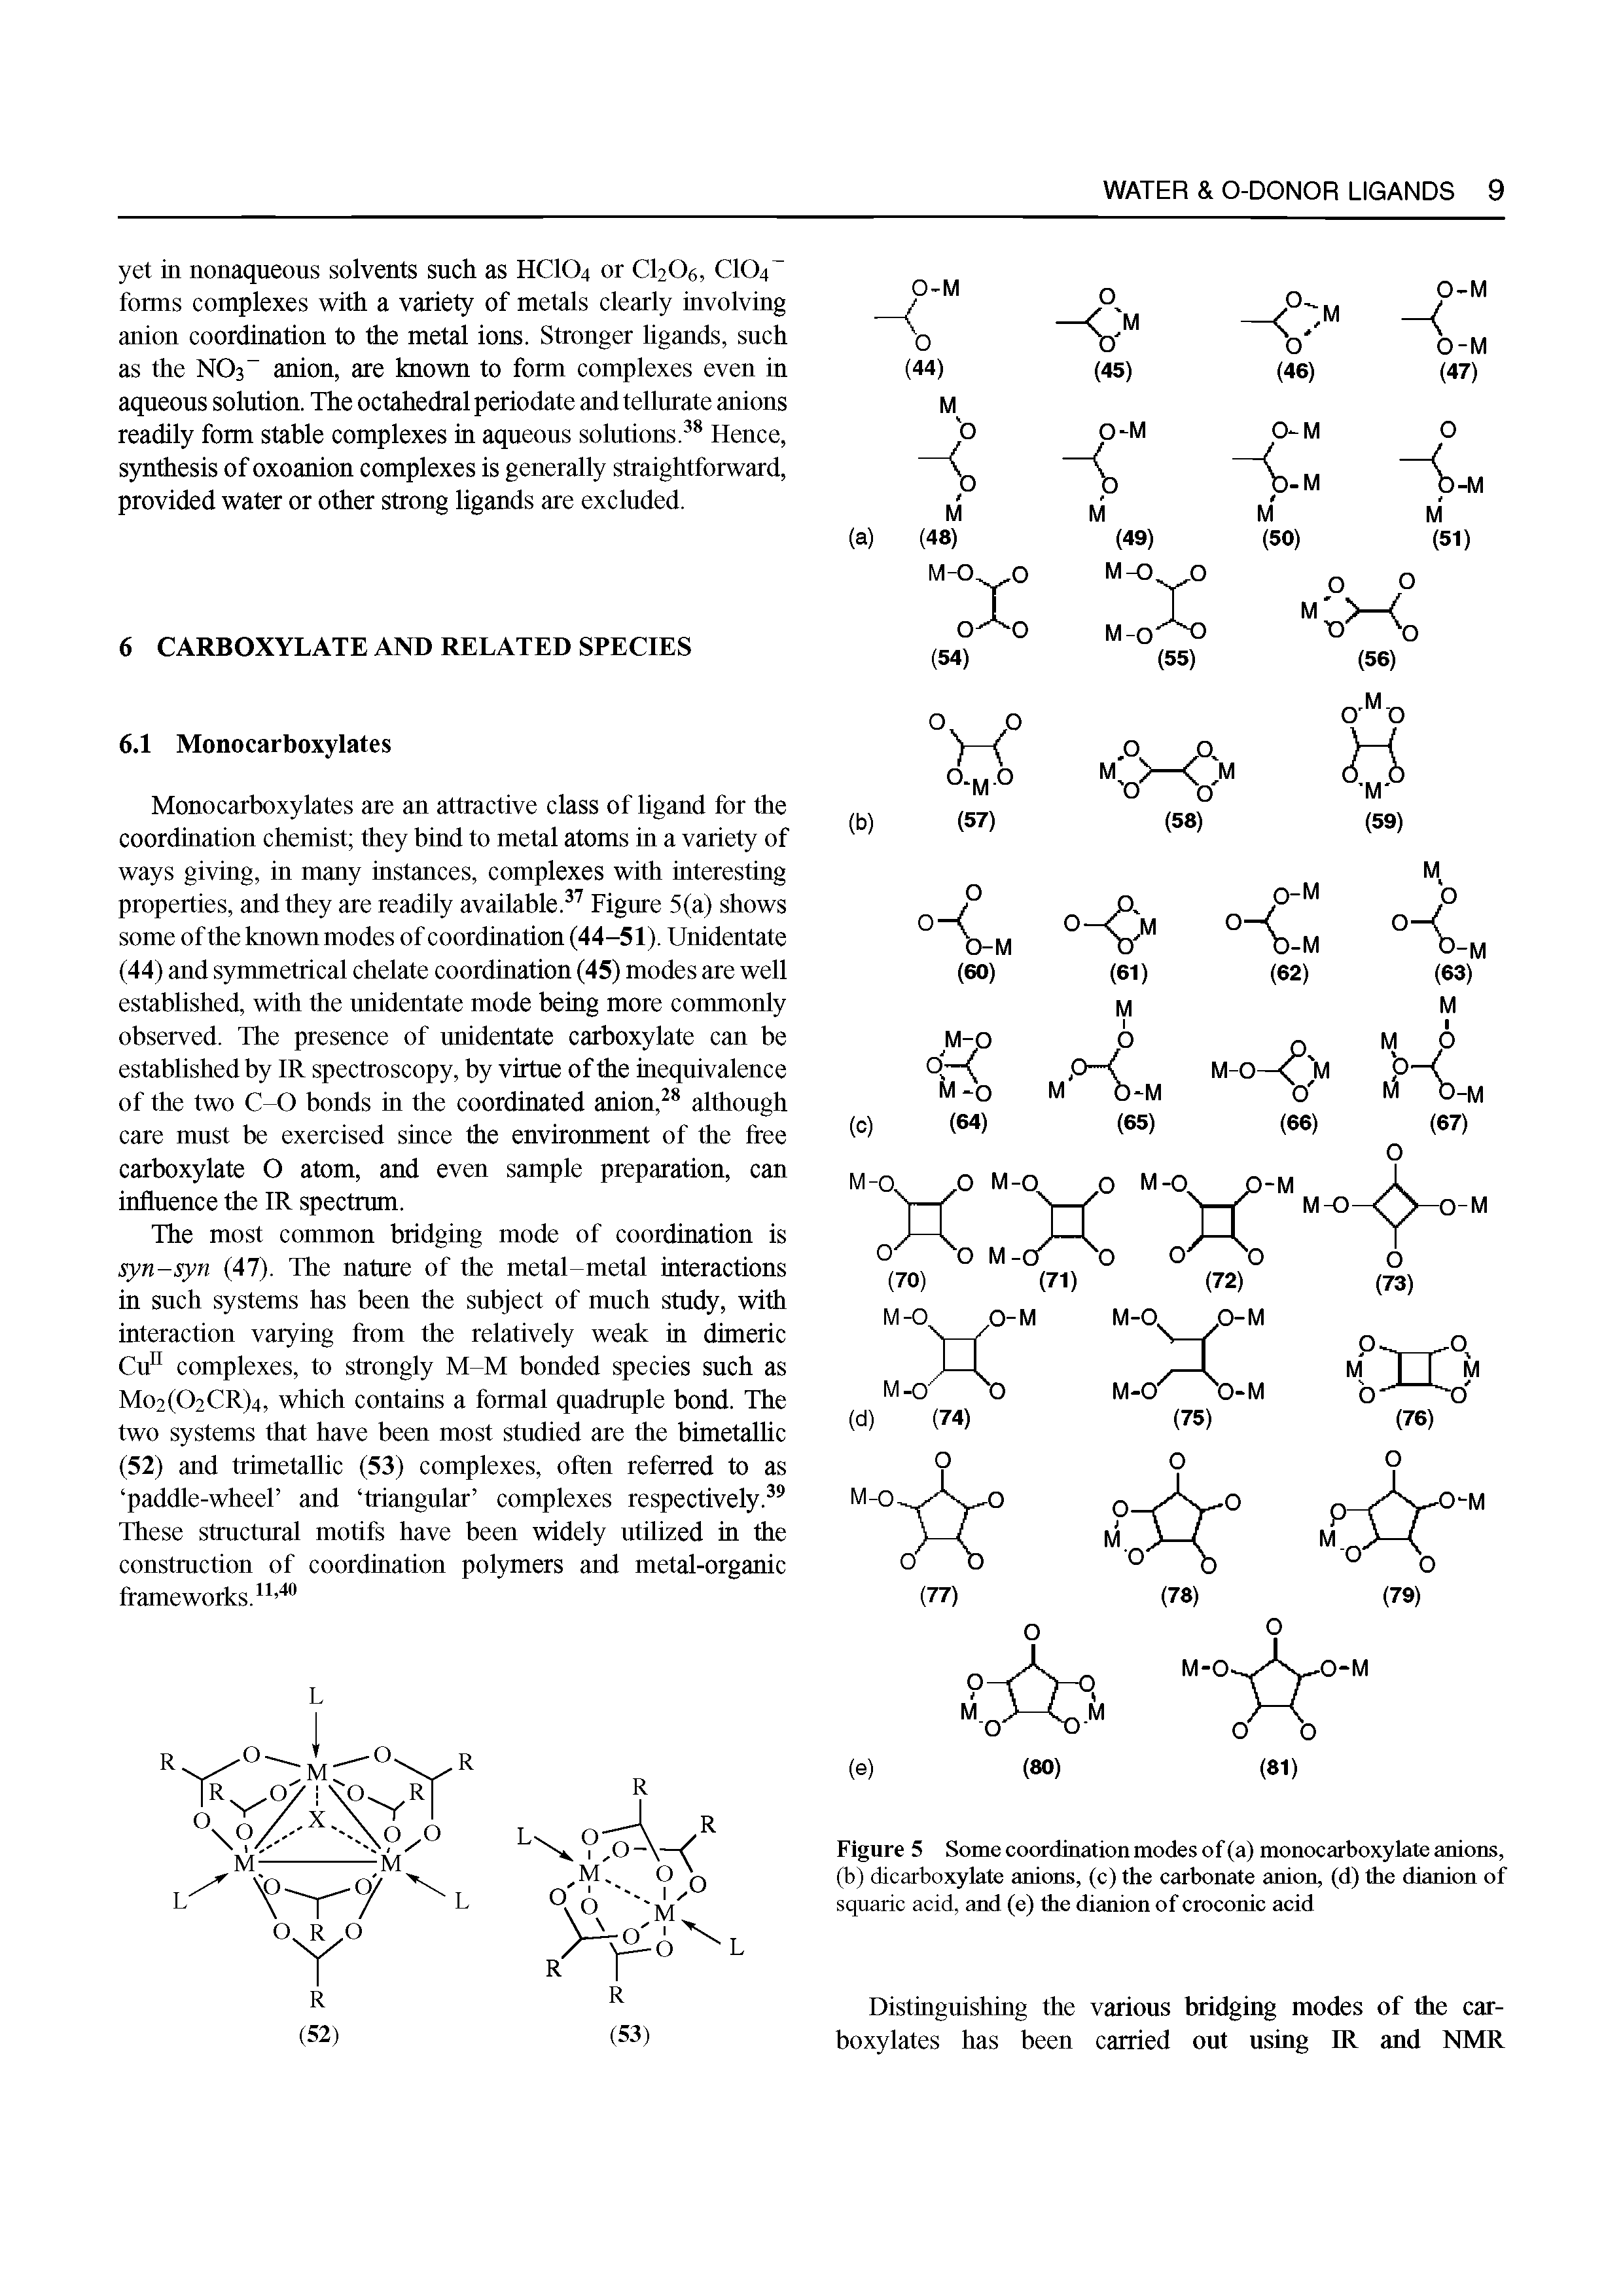 Figure 5 Some coordination modes of (a) monocarboxylate anions, (b) dicarboxylate anions, (c) the carbonate anion, (d) the dianion of squaric acid, and (e) the dianion of croconic acid...